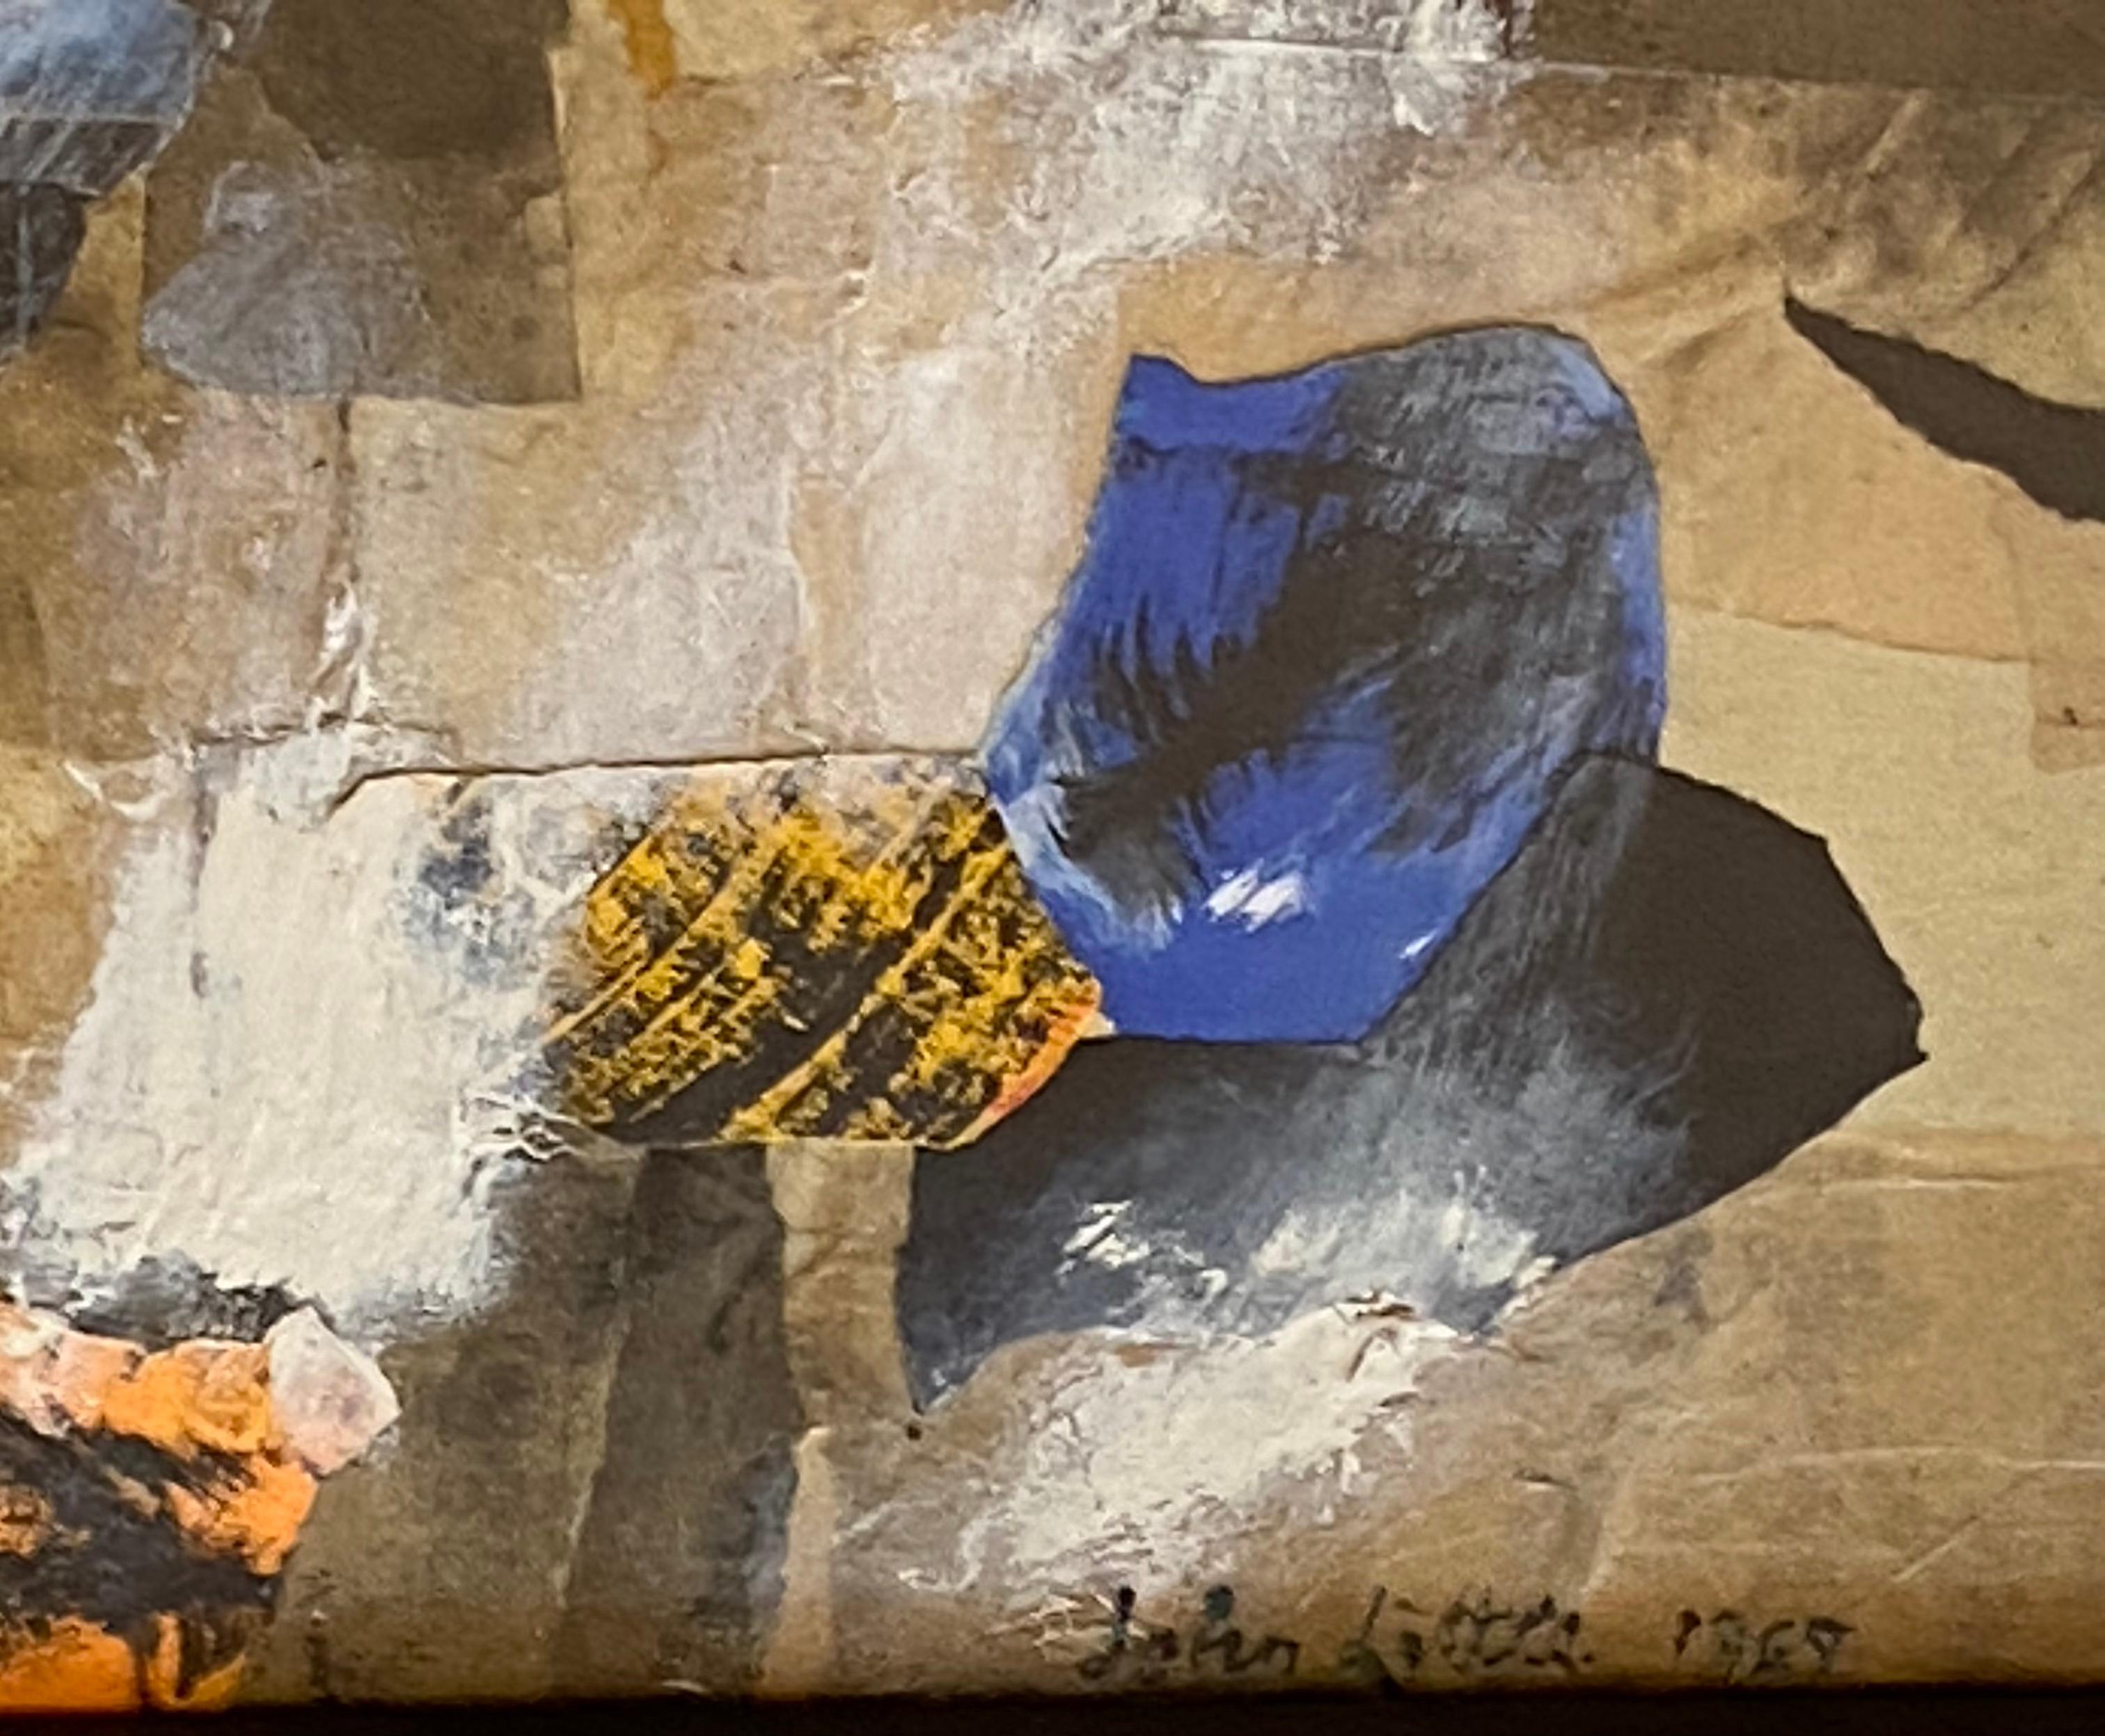 Original mixed media painting composed of acrylic paint and paper collage on heavy card stock by the well known American artist,  John Little. Signed lower right and dated 1969. Condition is excellent. Under glass. The artwork is housed in its